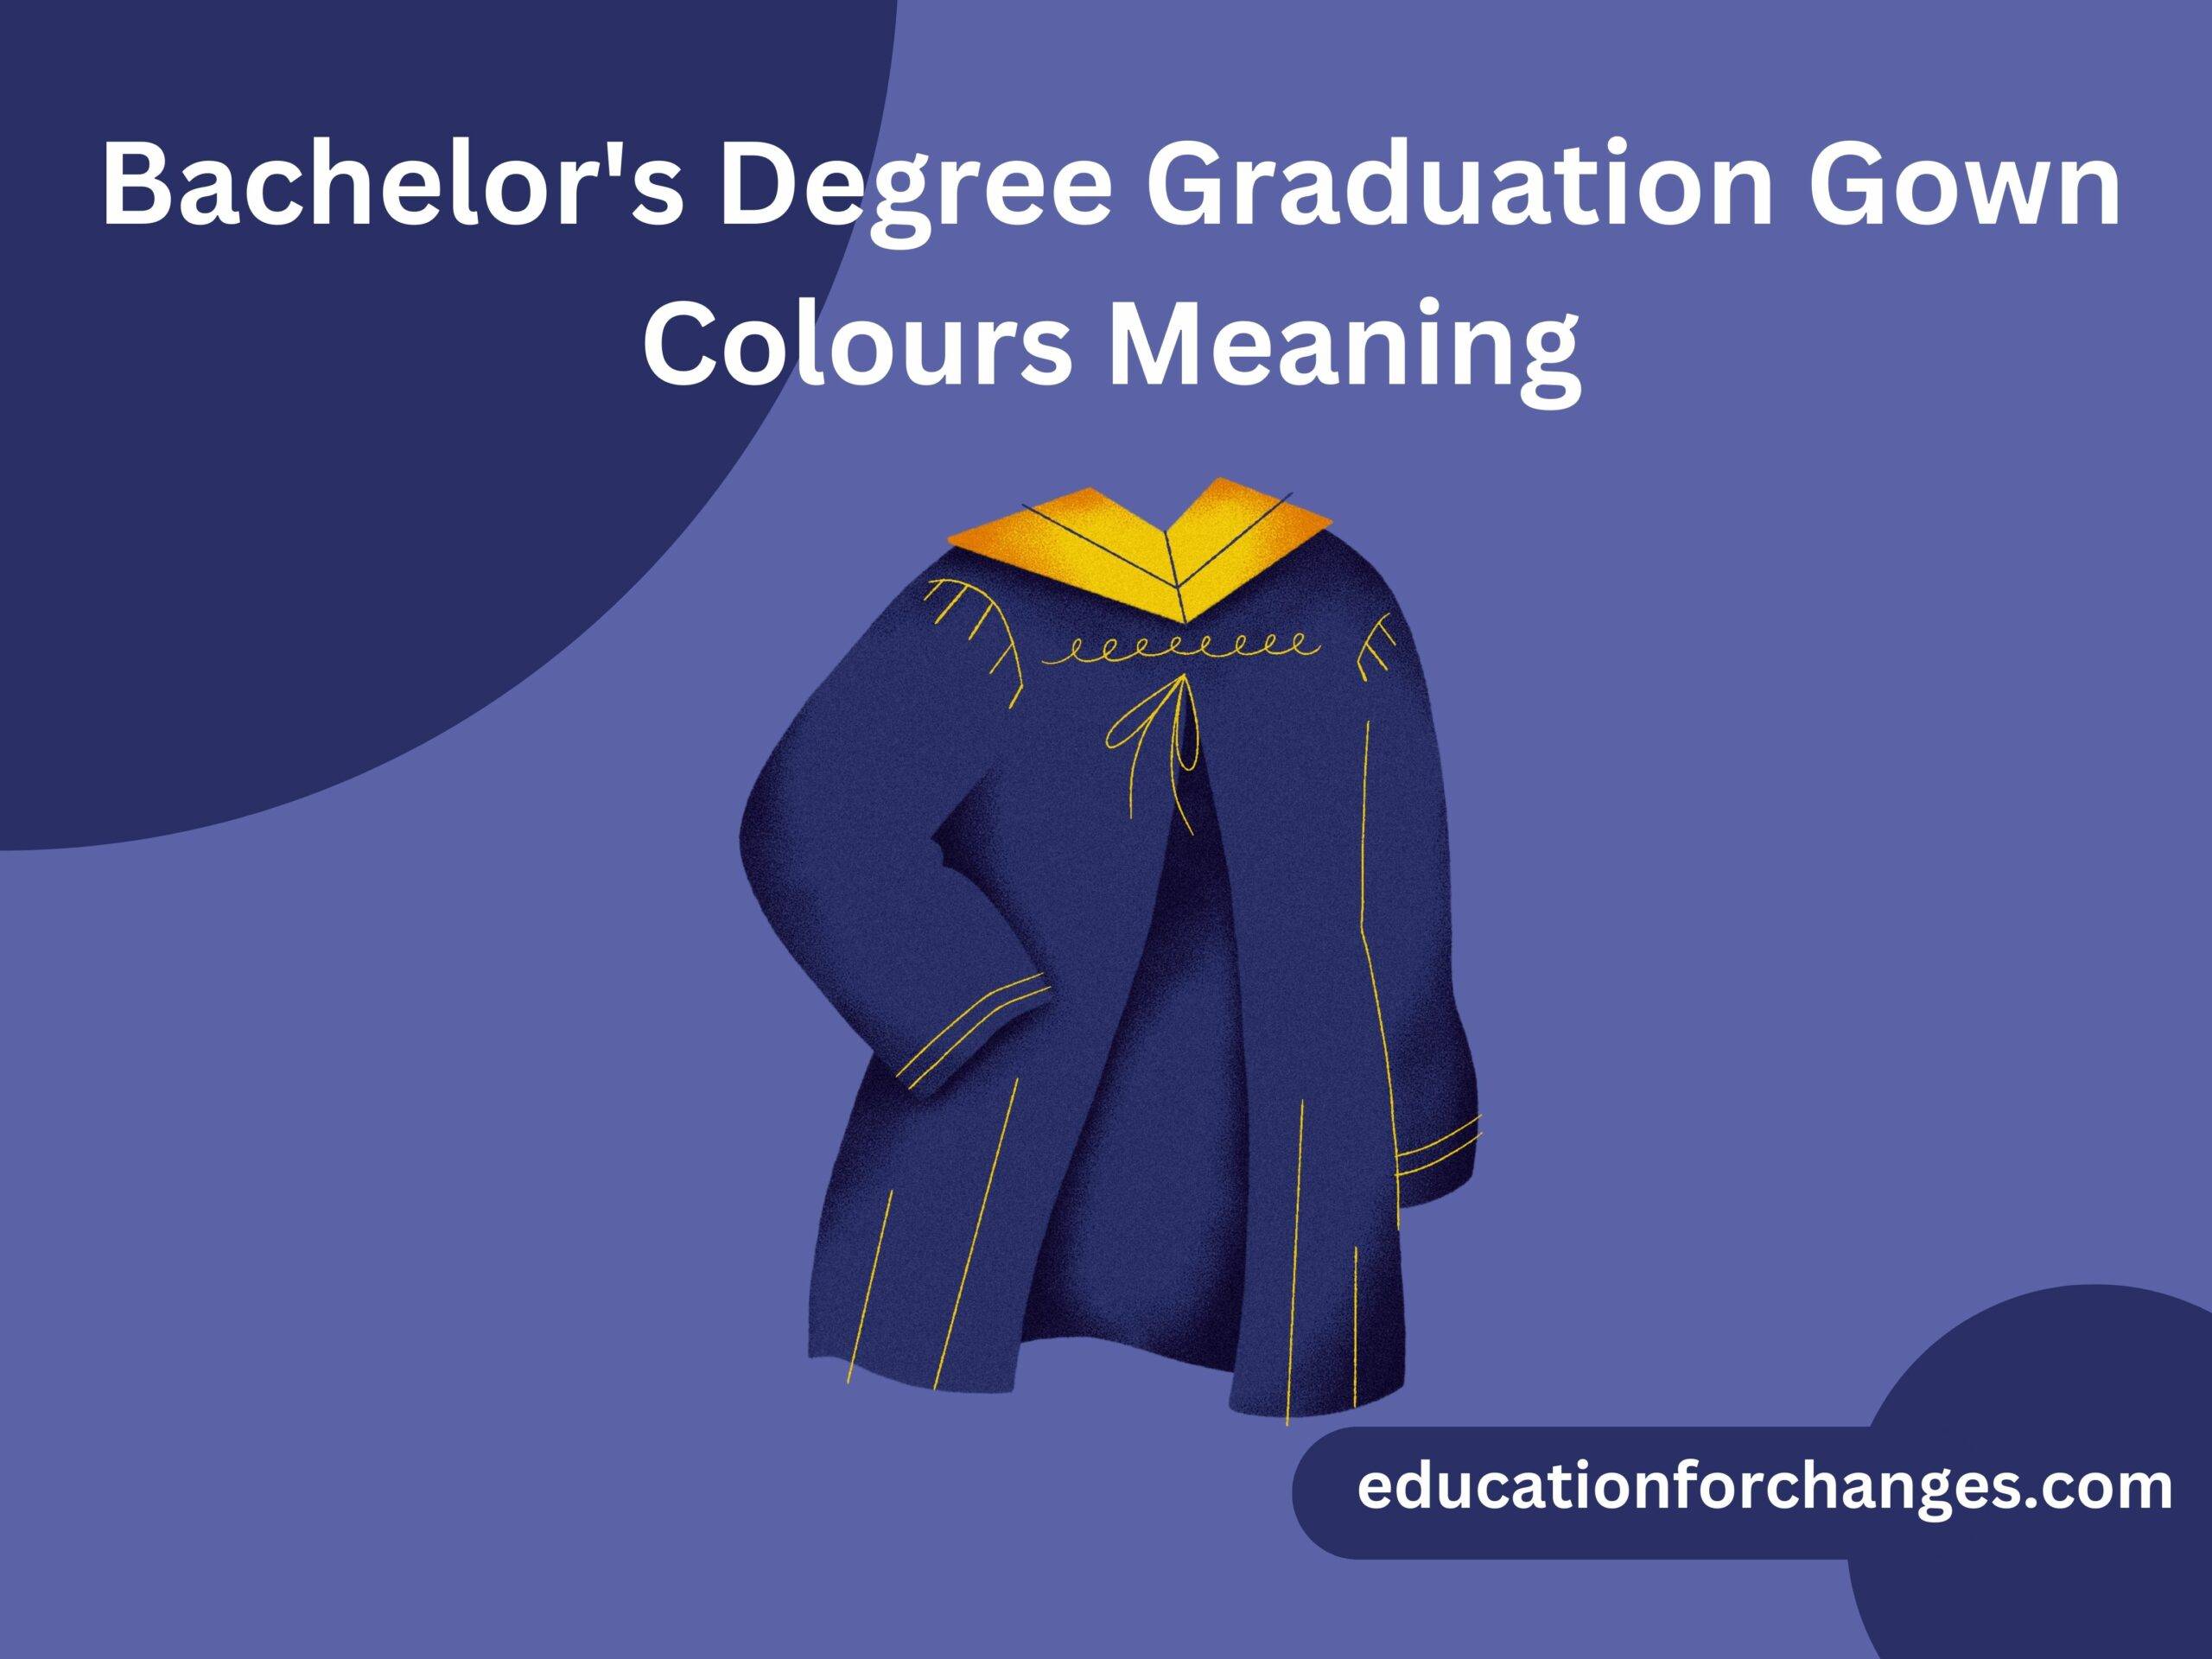 Bachelor's Degree Graduation Gown Colours Meaning